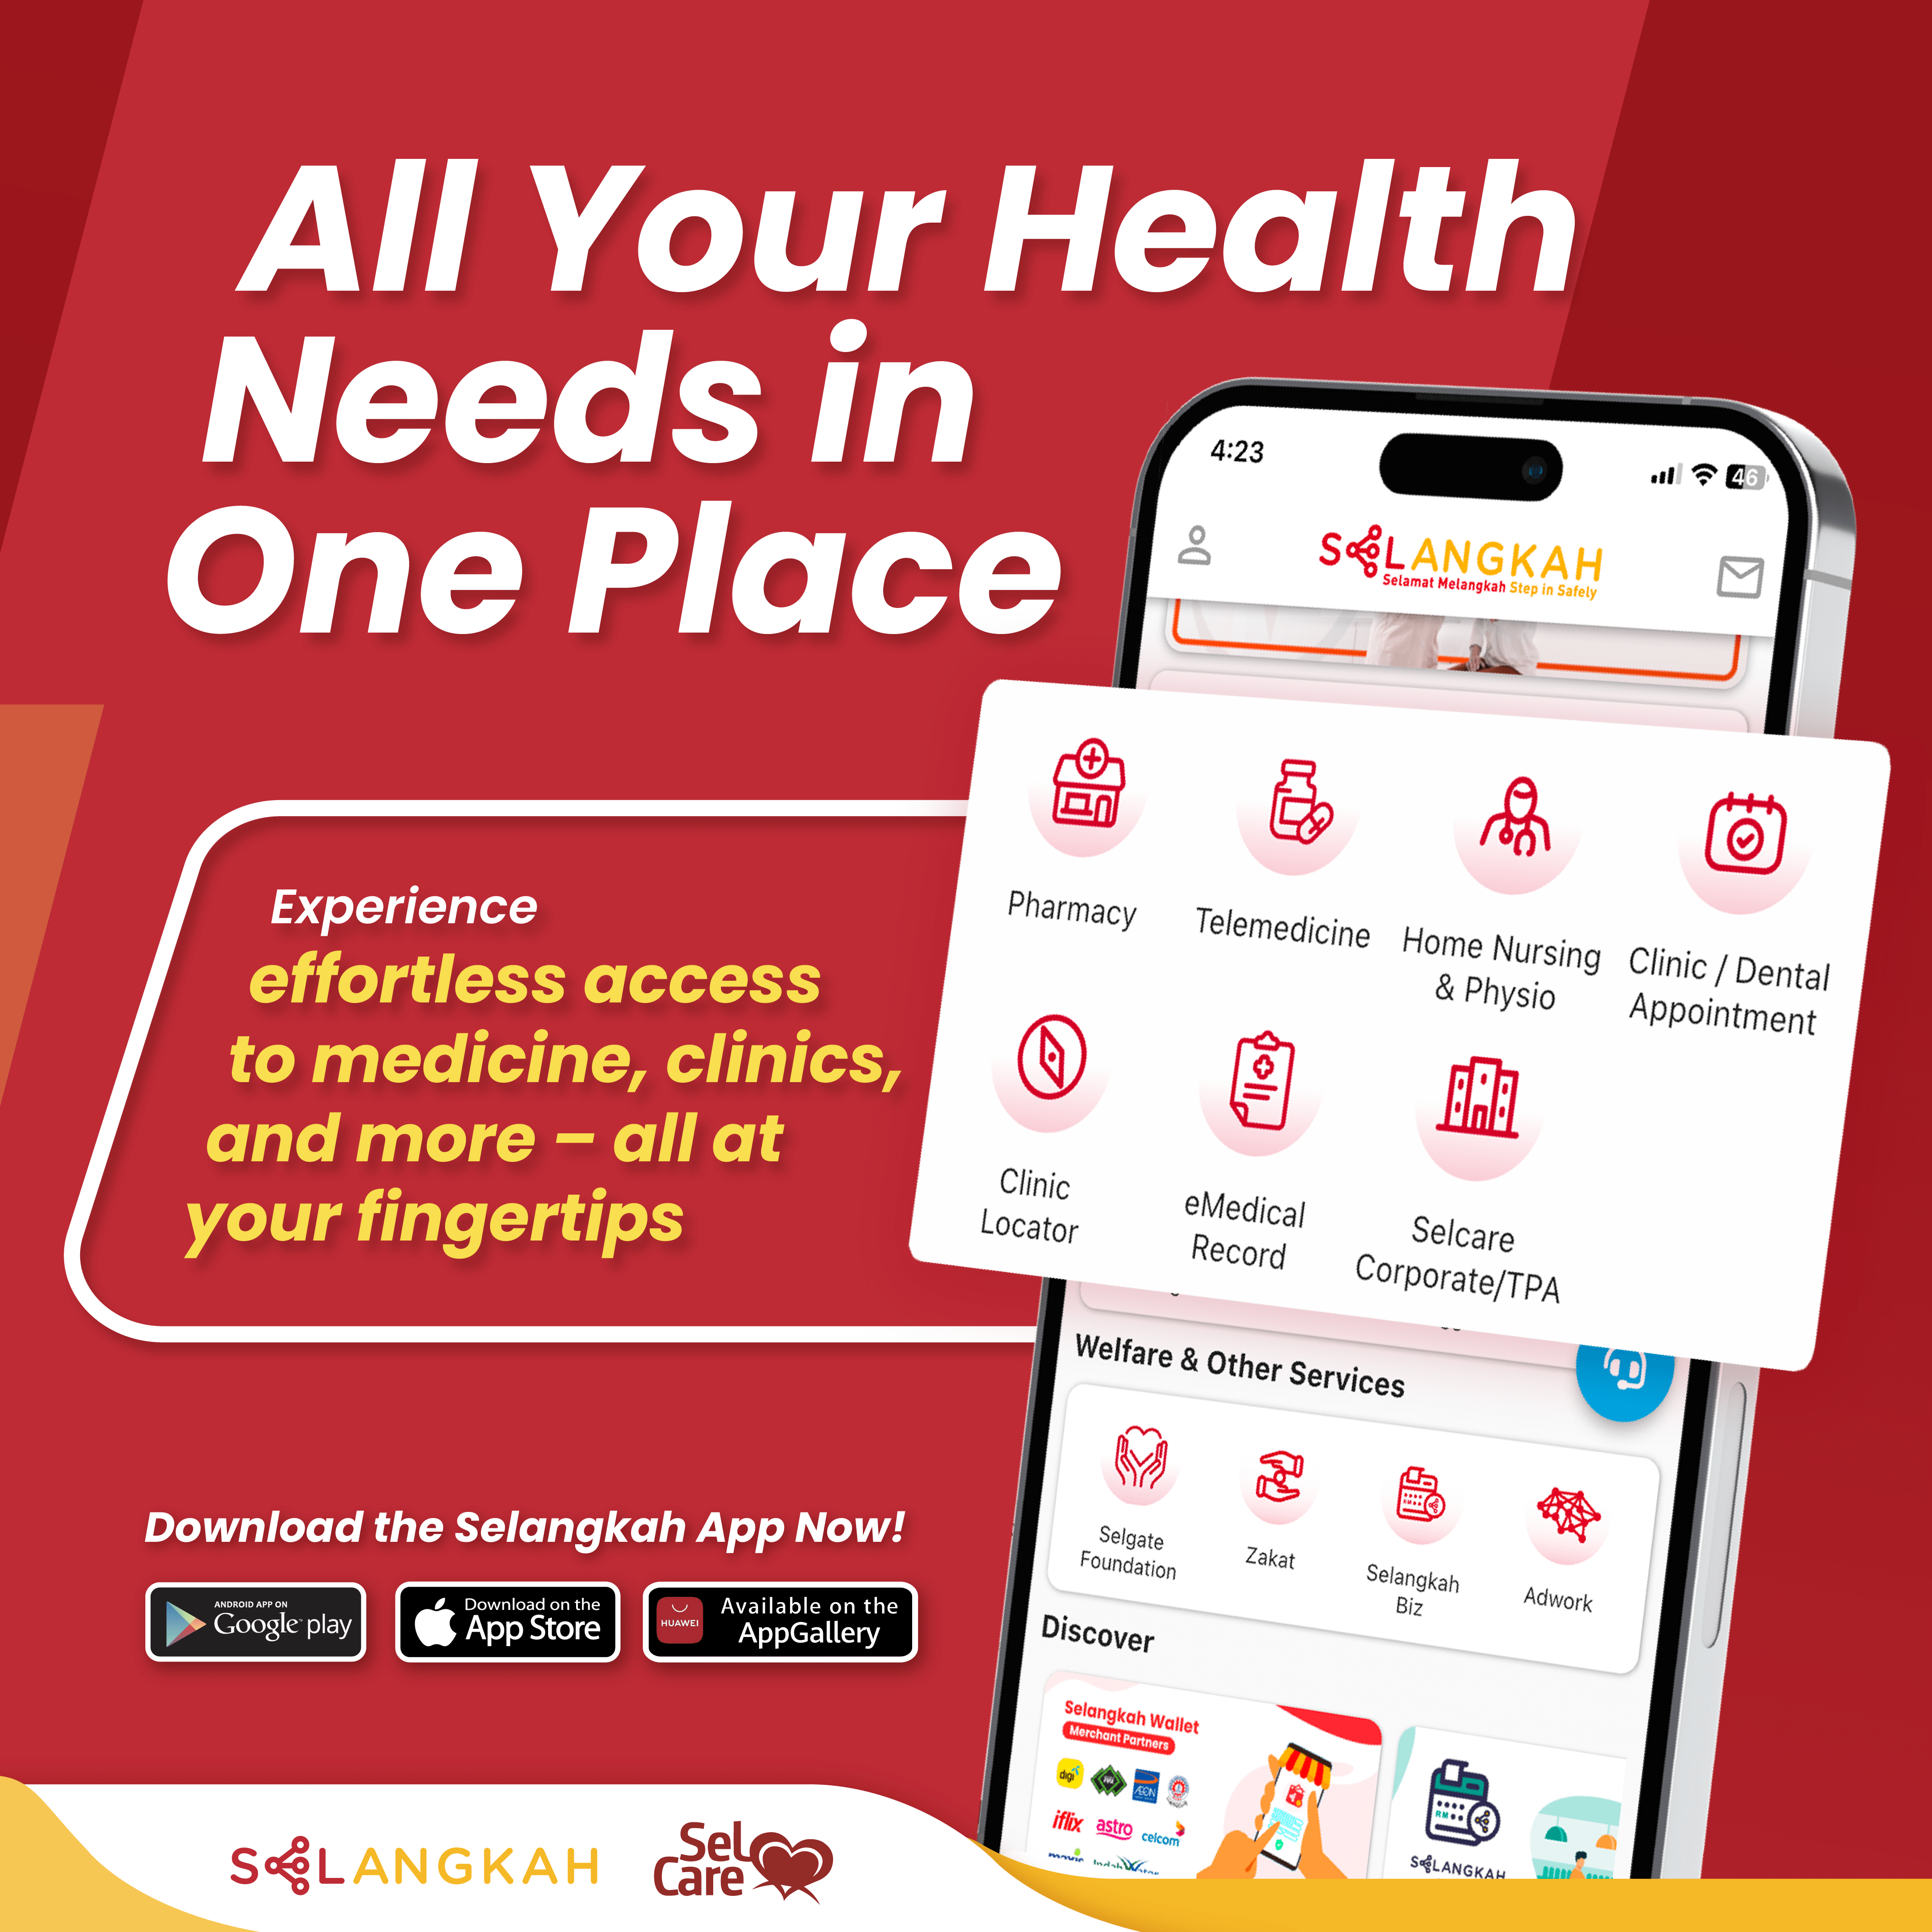 ALL YOUR HEALTH NEEDS IN ONE PLACE